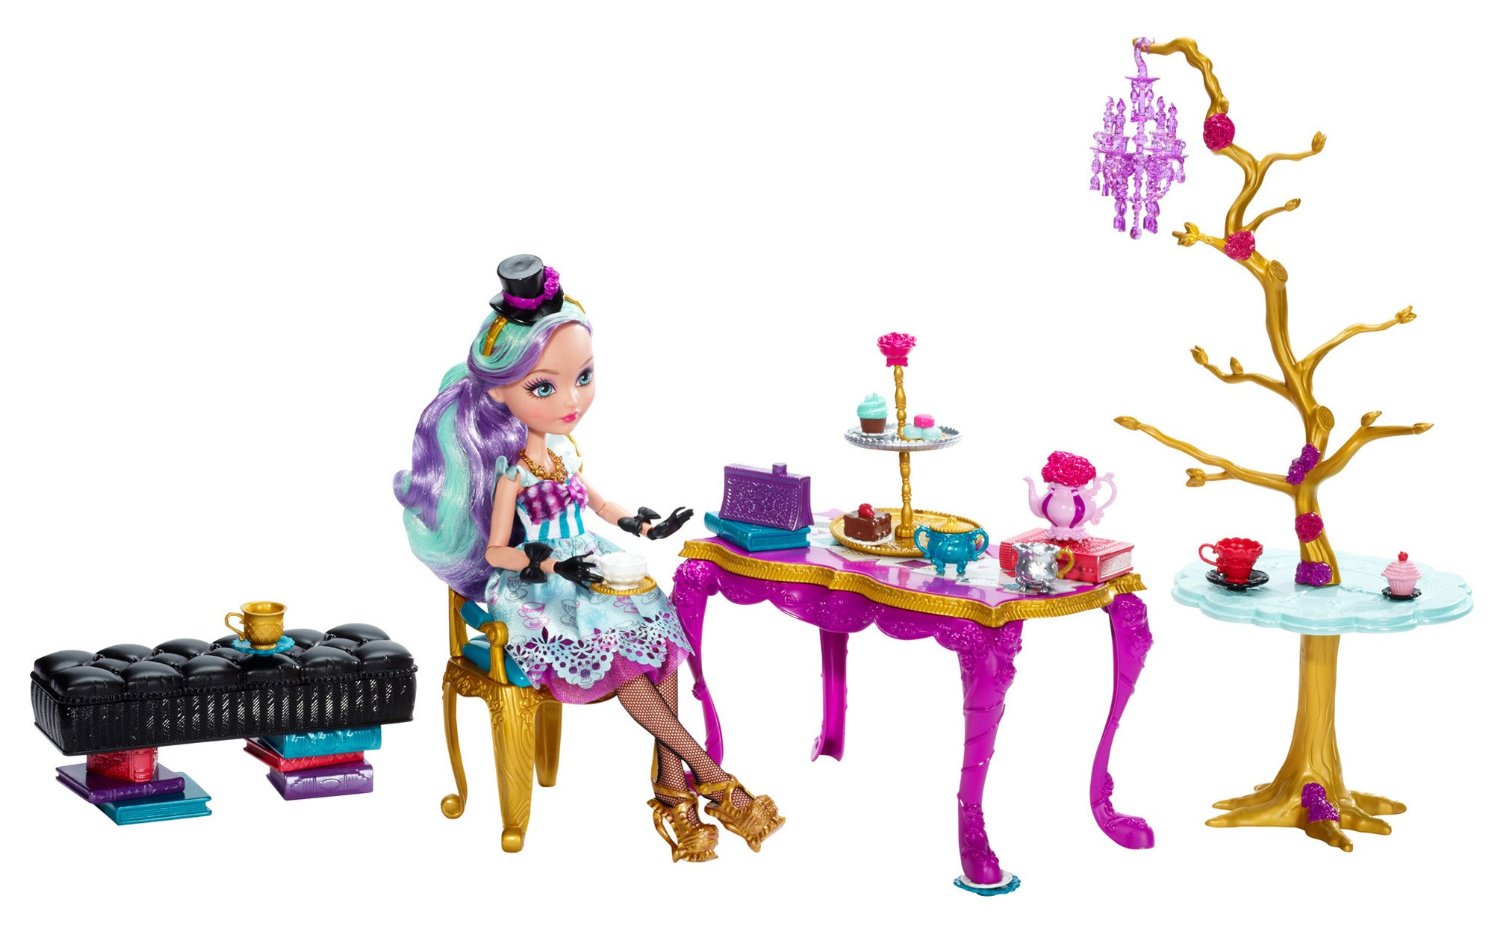 Tiệc trà của công chúa Madeline Hatter Ever After High Hat-Tastic Madeline Hatter Doll and Party Display